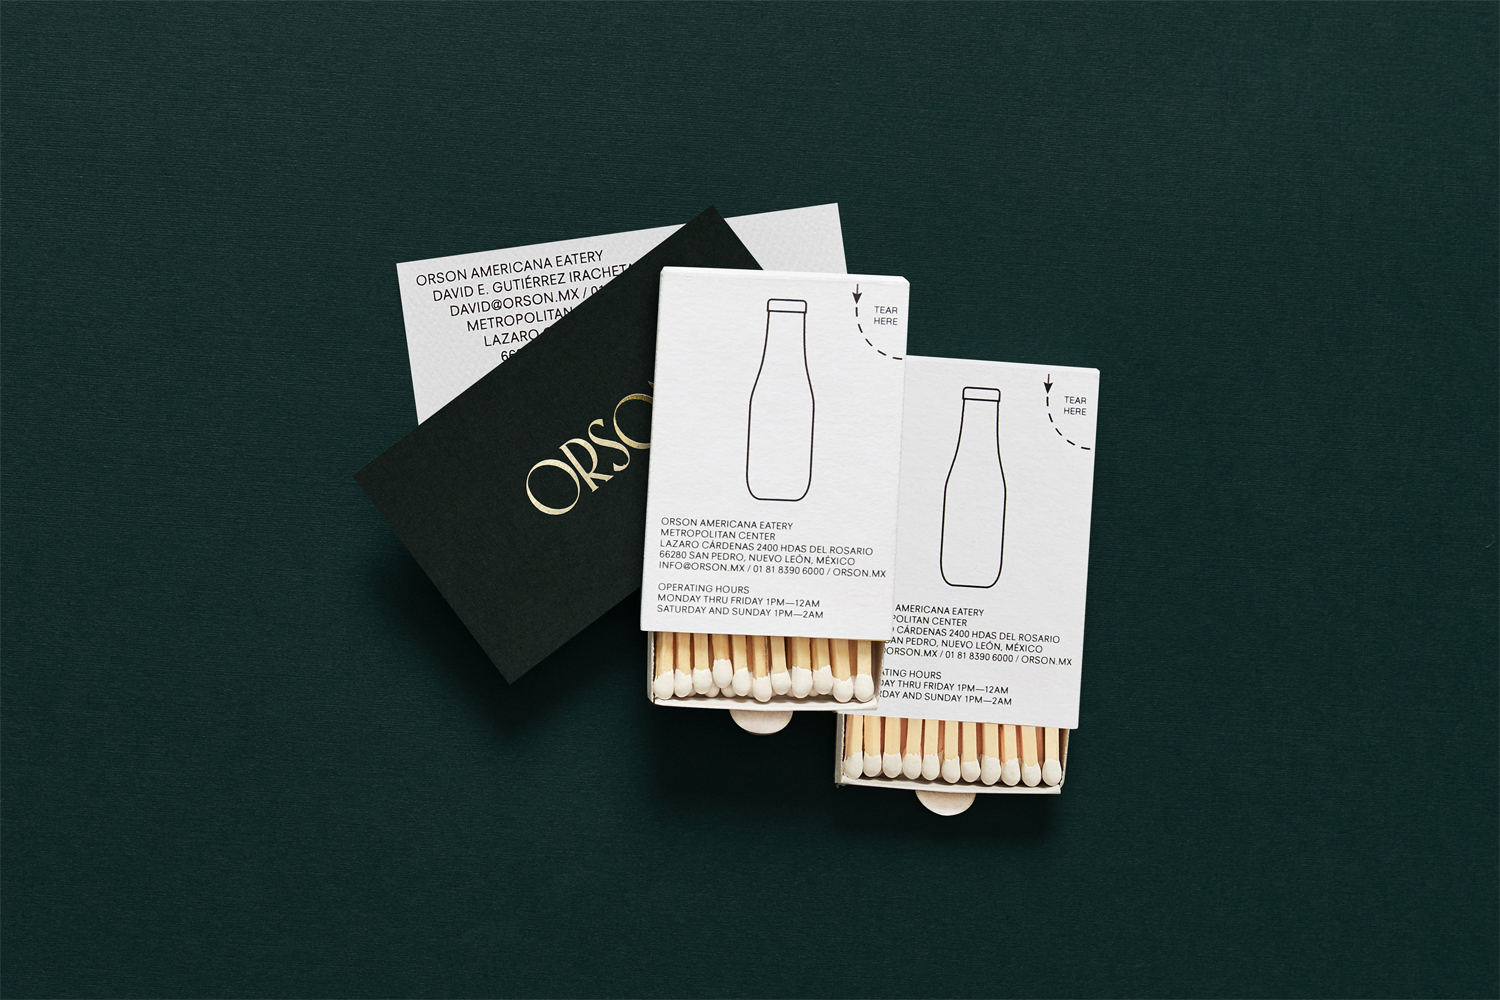 Business cards and match boxes designed by Anagrama for San Pedro based burger bar Orson